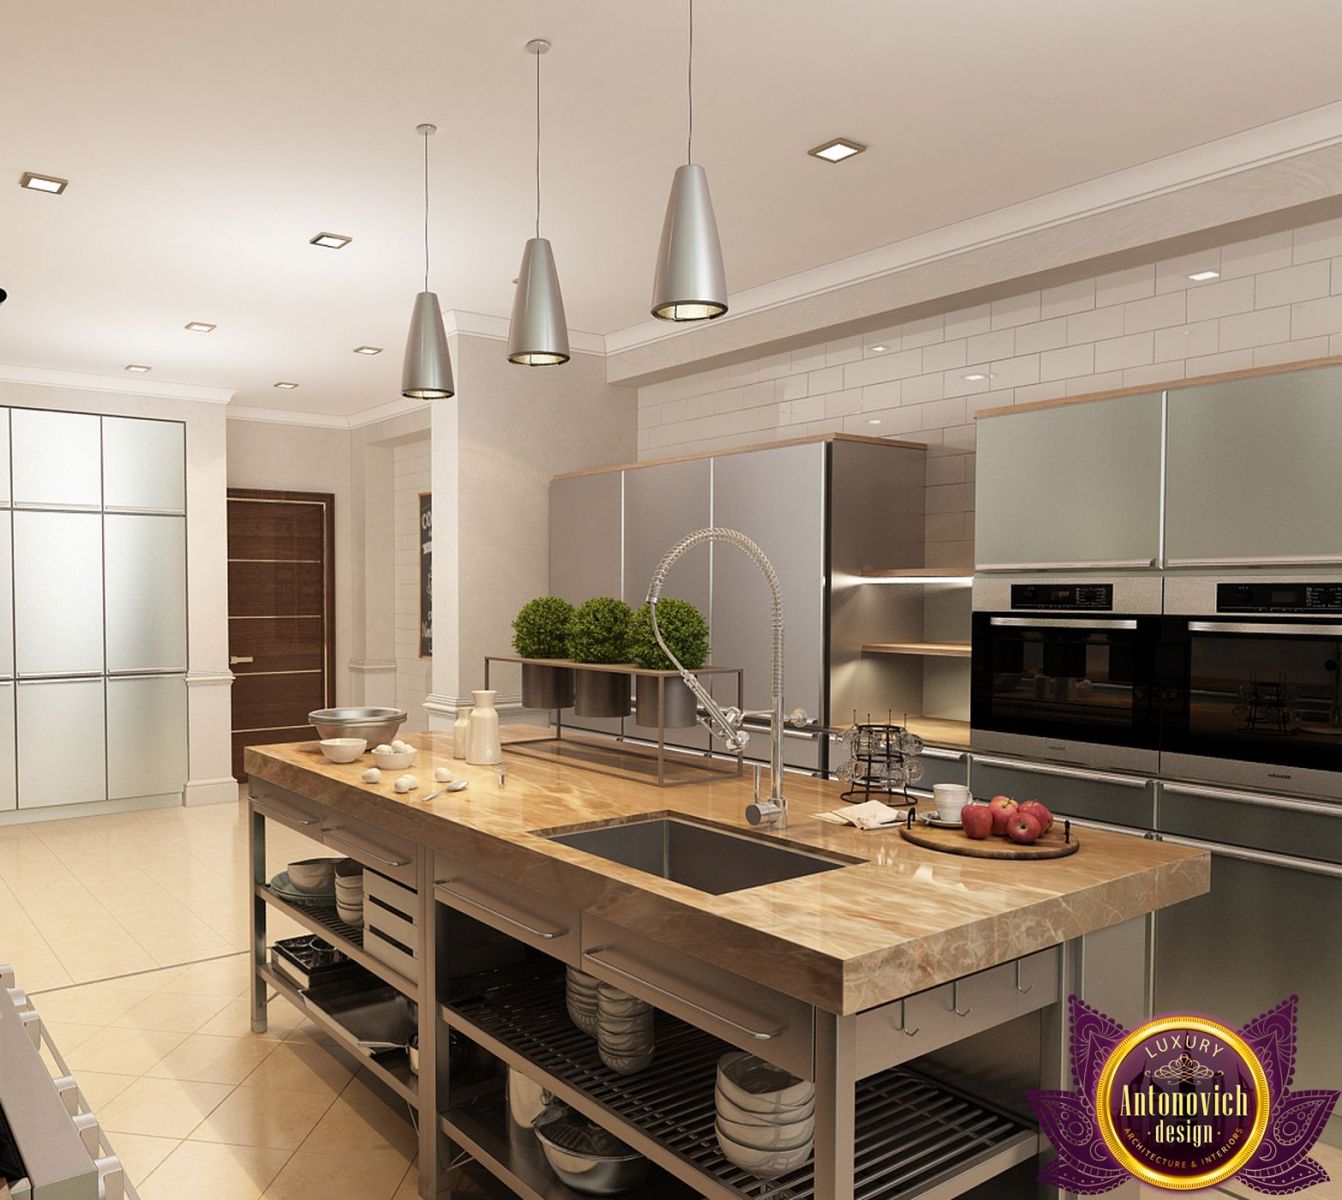 High-end kitchen appliances and fixtures by Antonovich Group